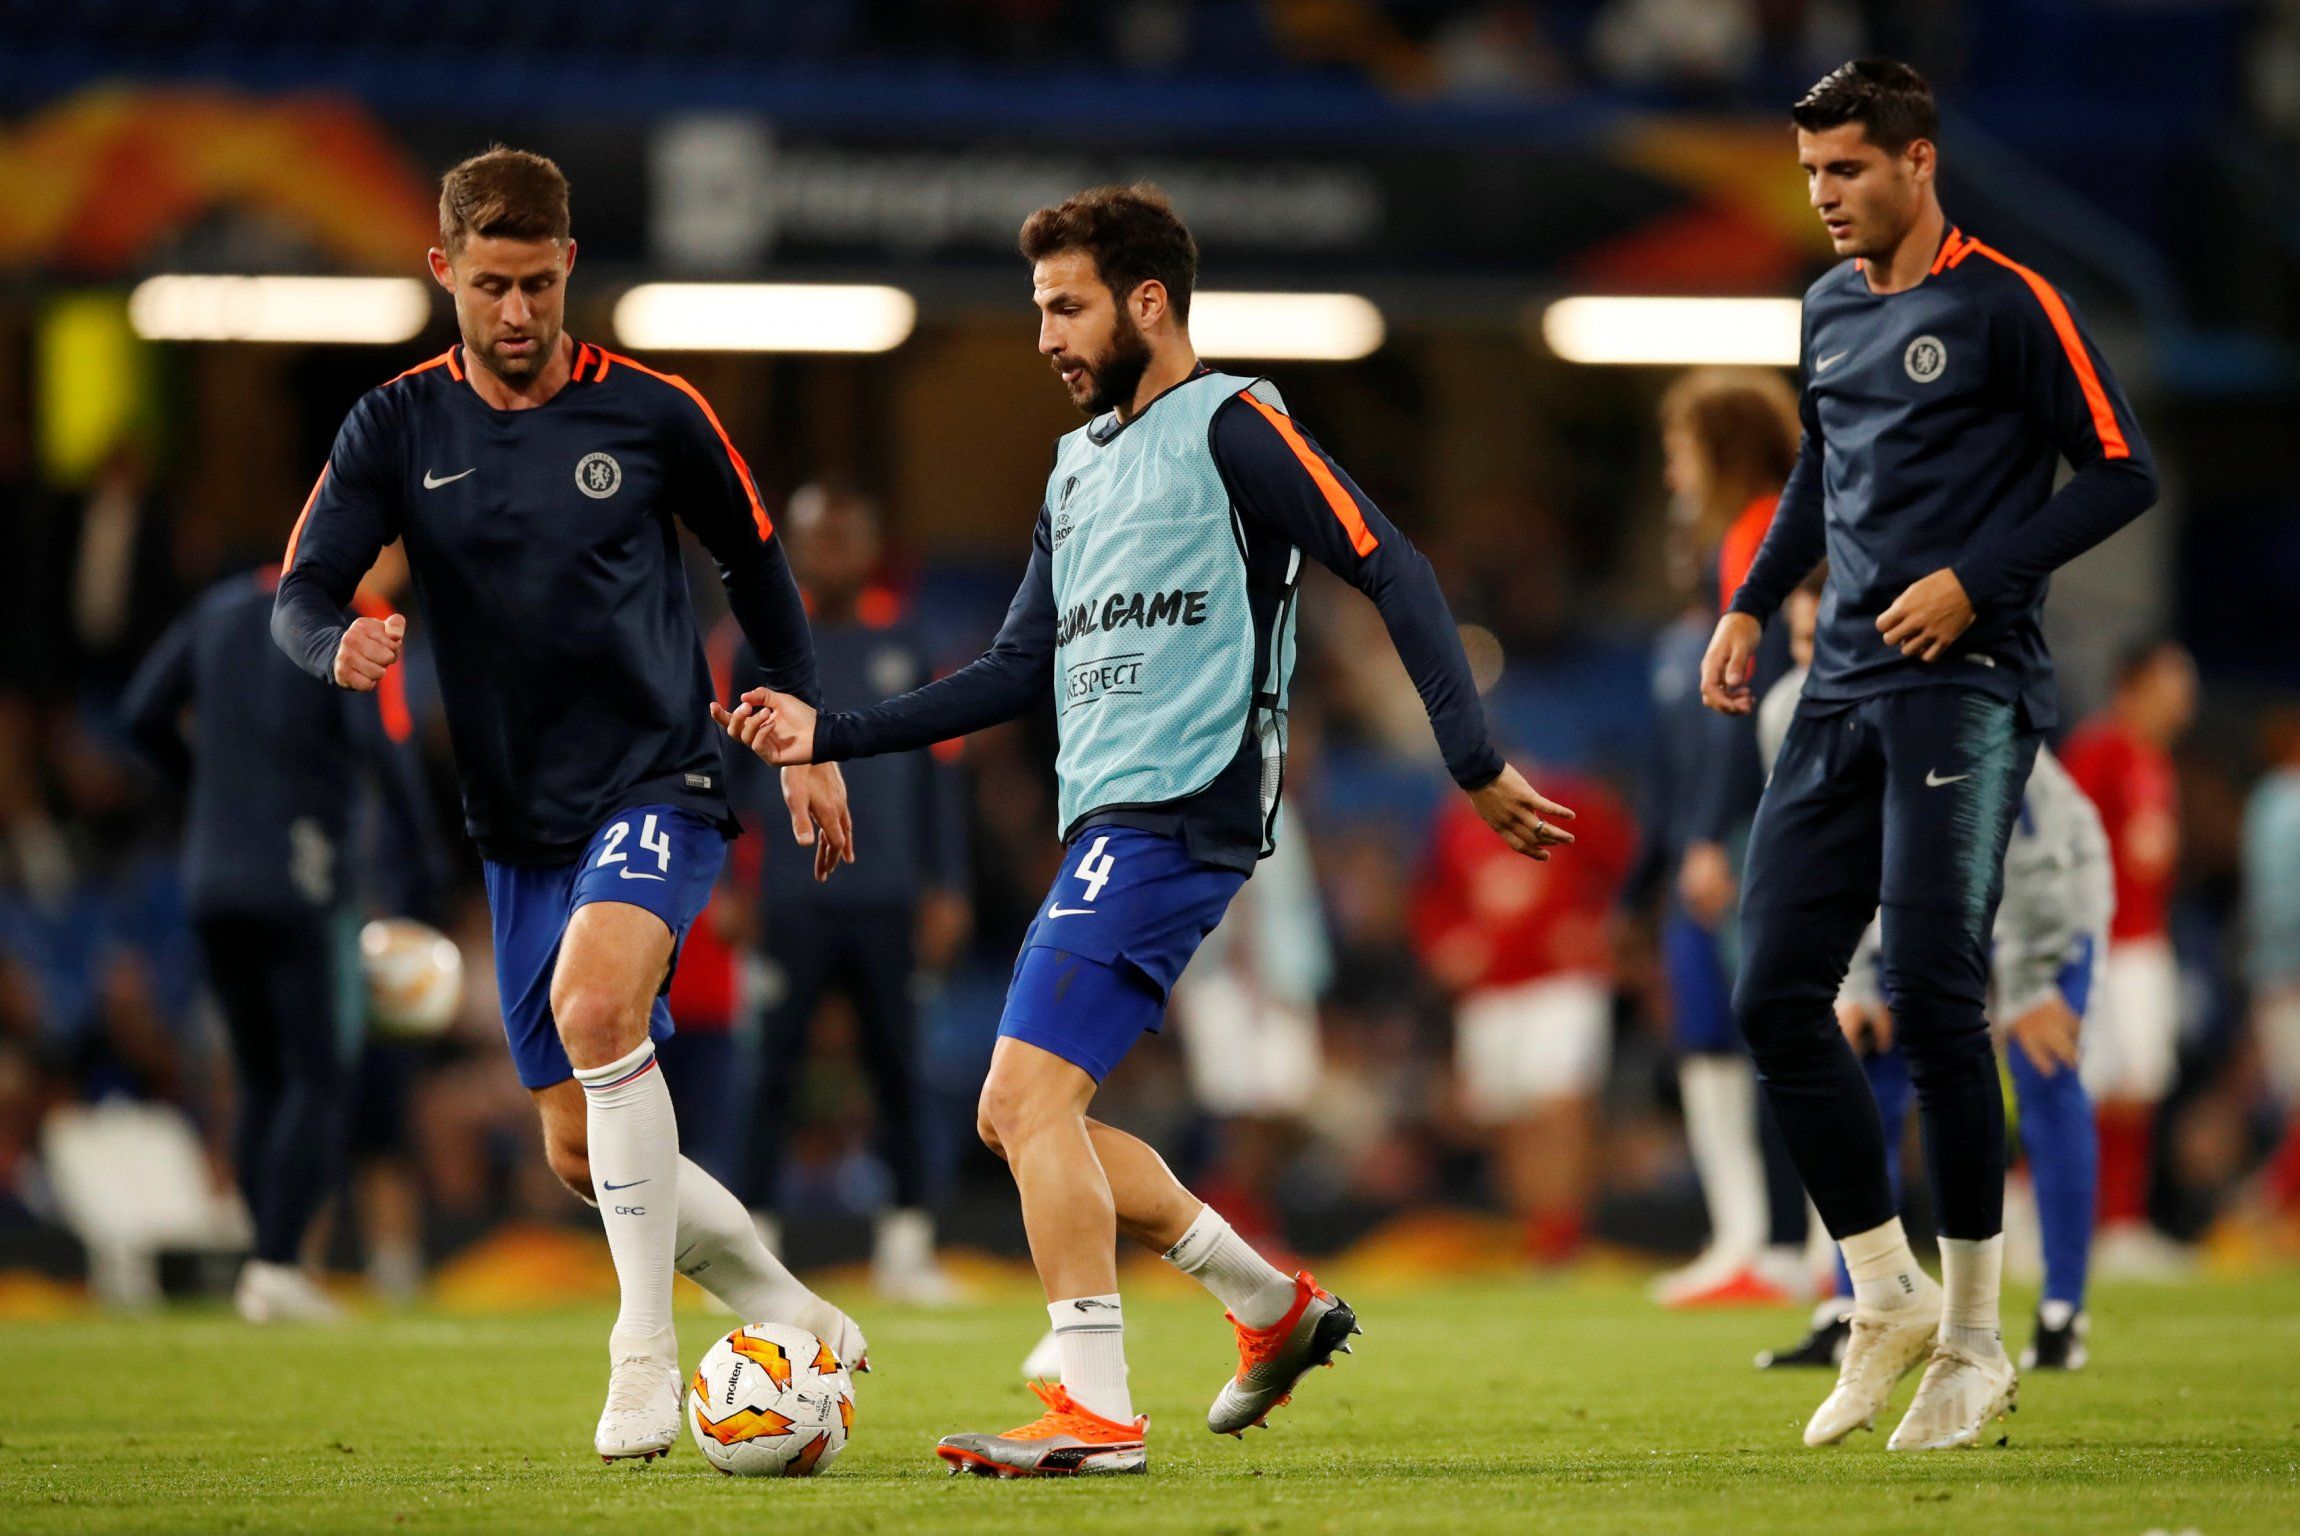 Cesc Fabregas warming up before a Chelsea game